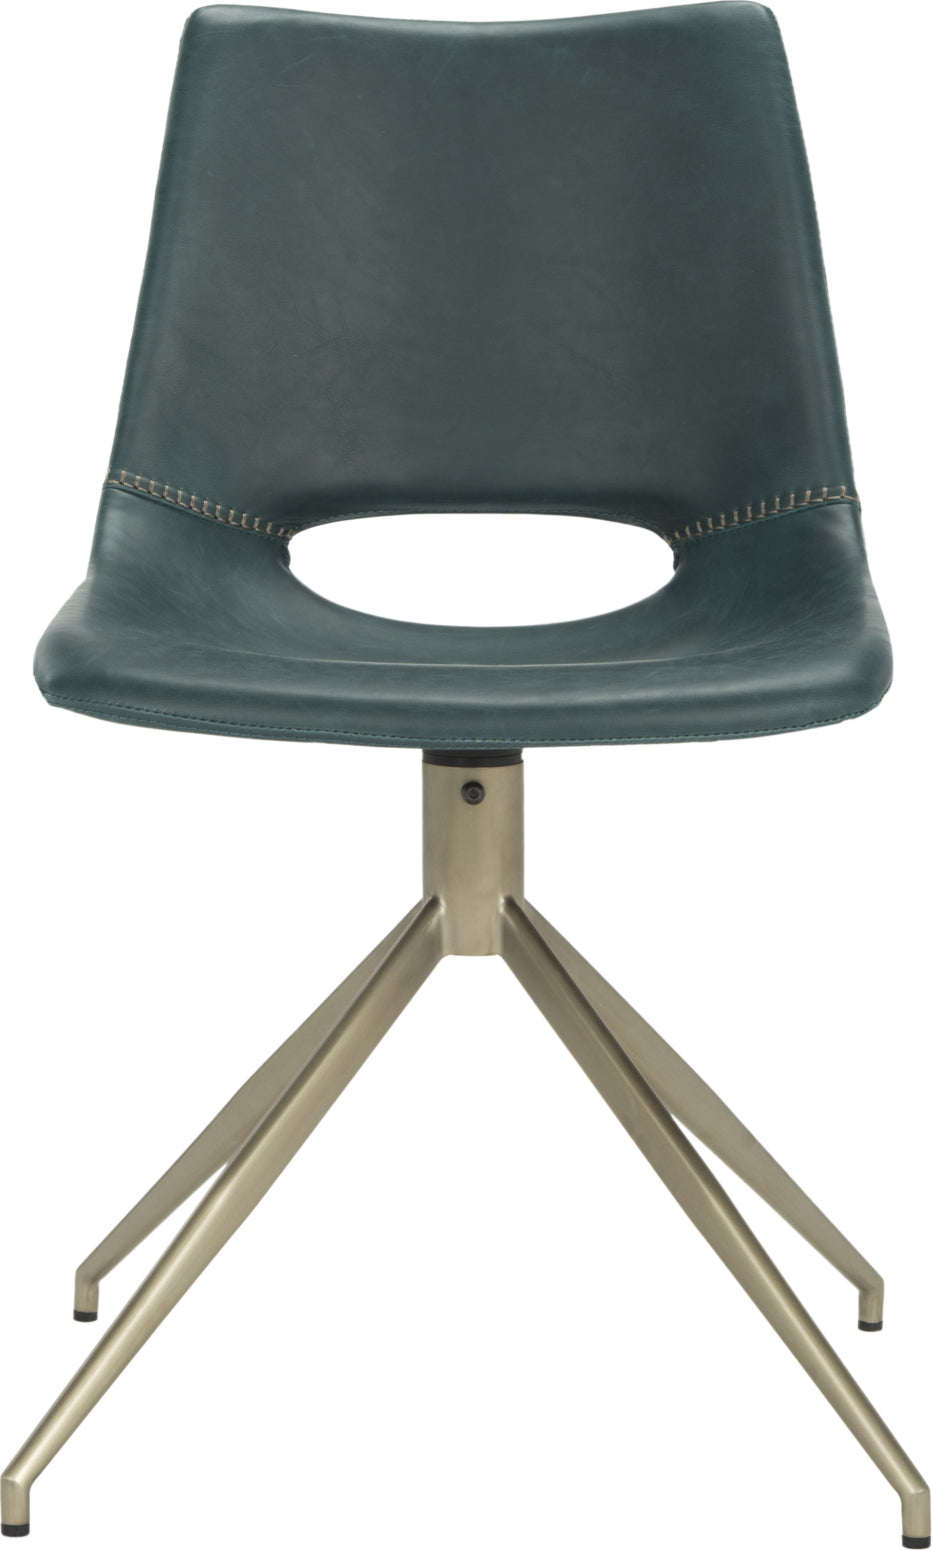 Safavieh Danube Midcentury Modern Leather Swivel Dining Chair Blue and Brass Furniture main image